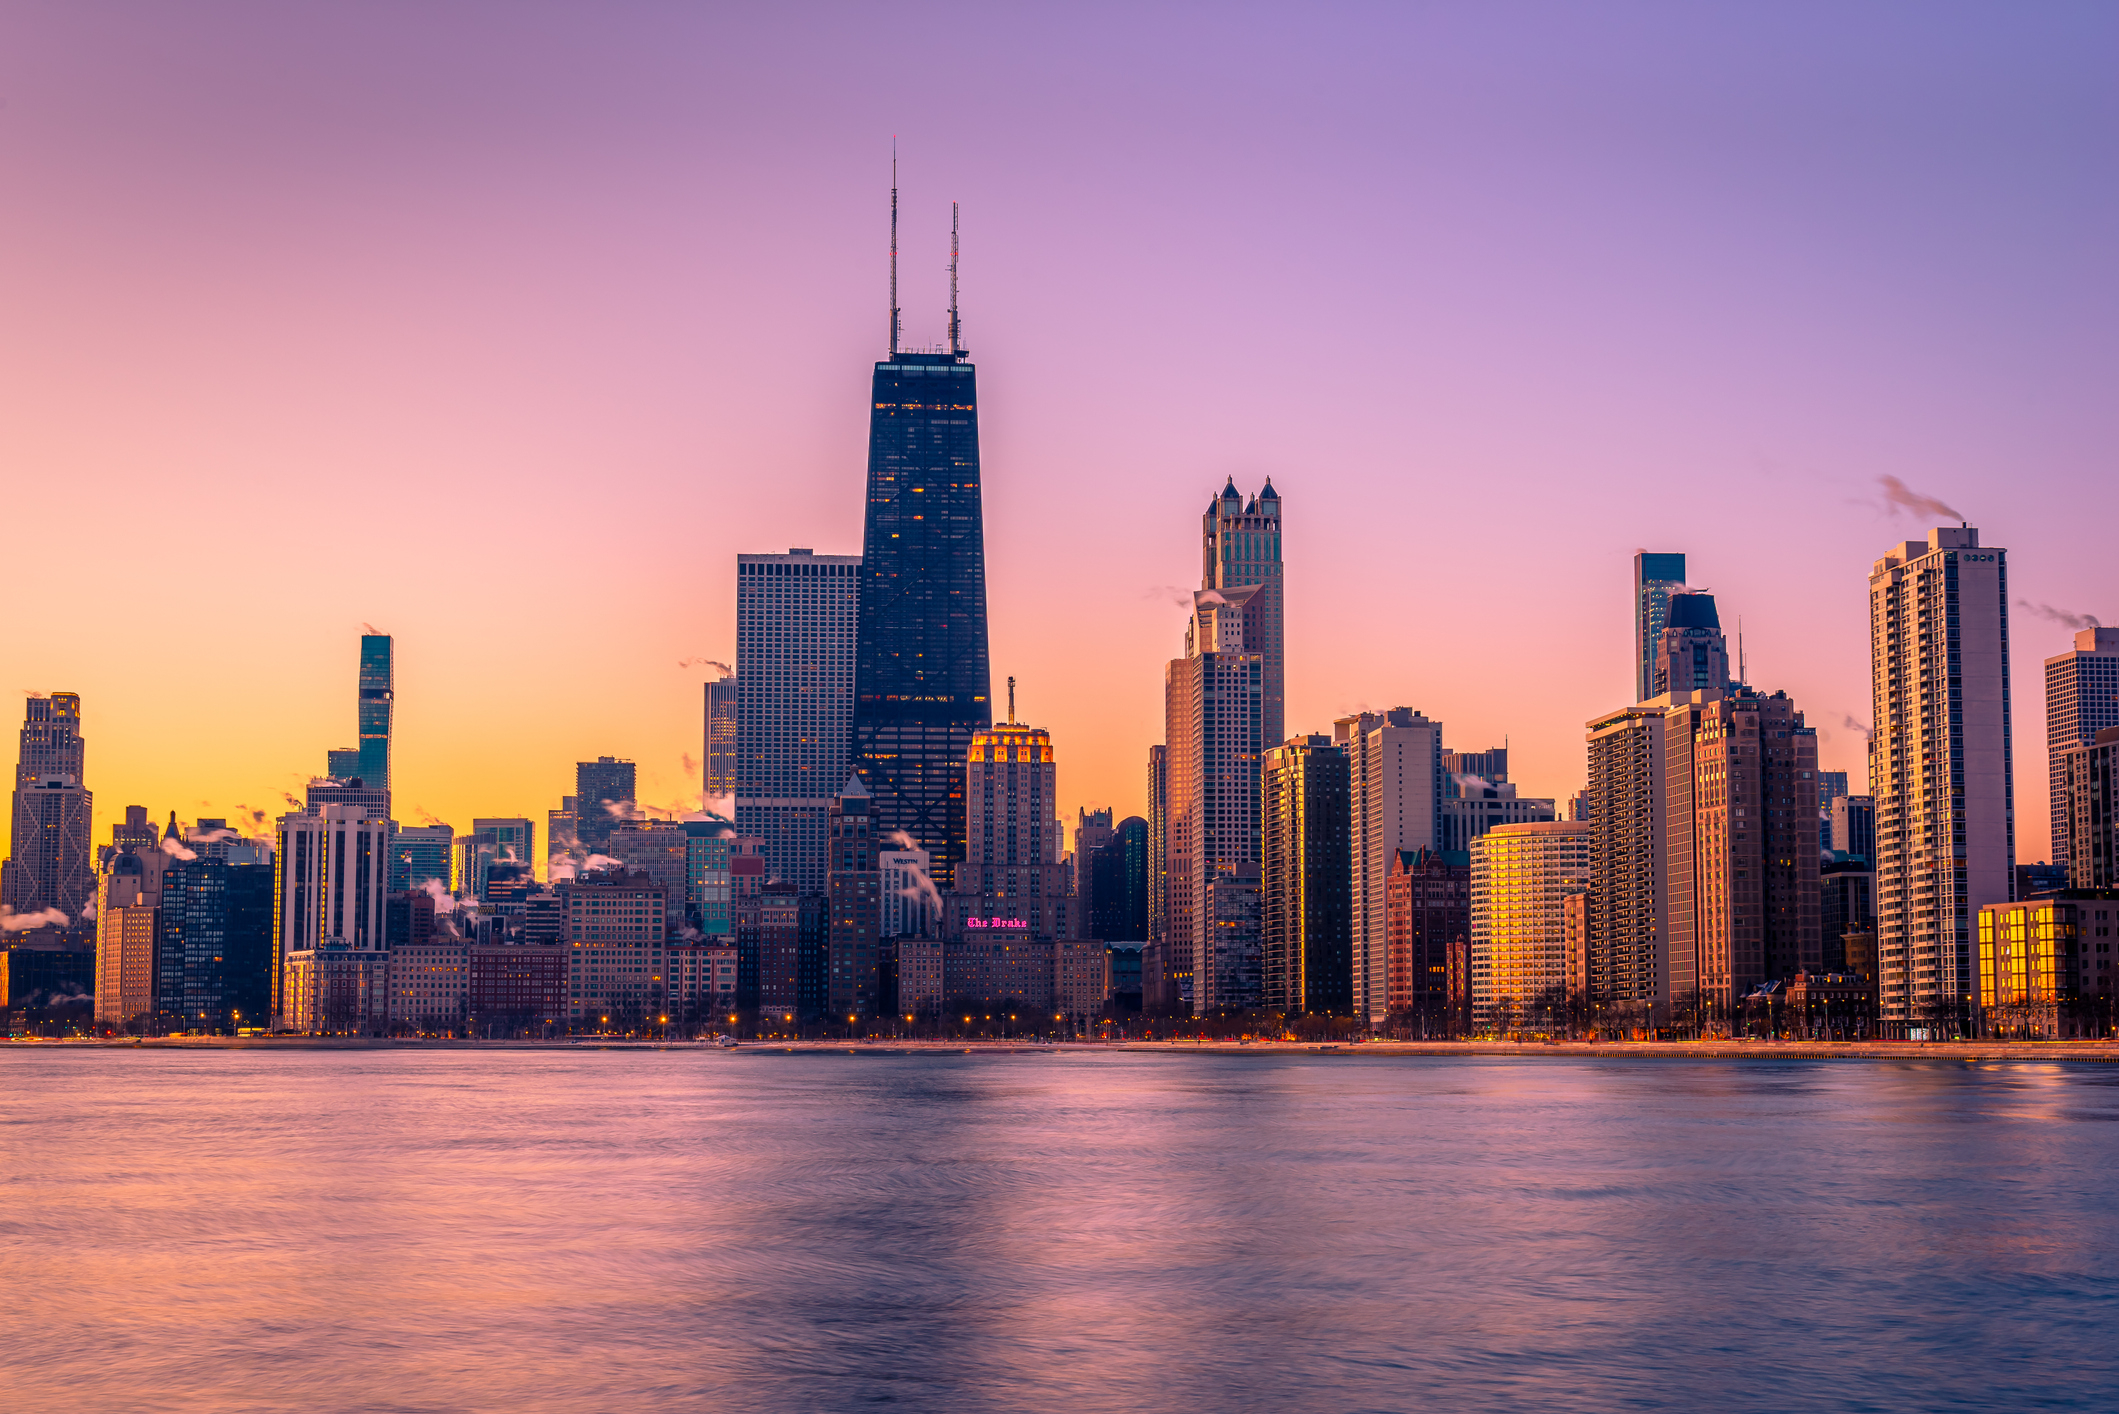 Chicago skyline at sunset with reflections on the water.
